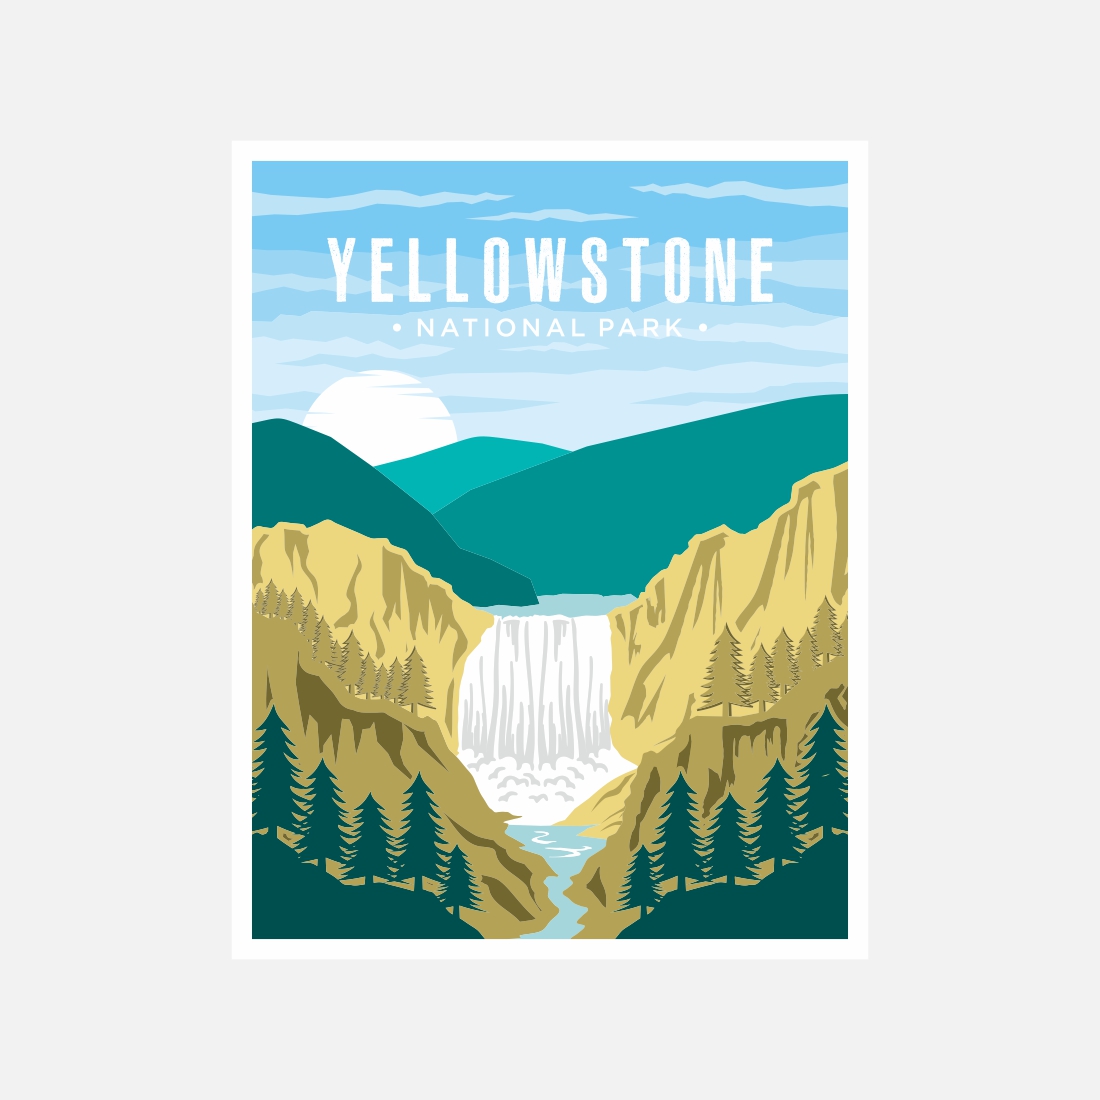 Yellowstone Falls National Park poster vector illustration design – Only $8 preview image.